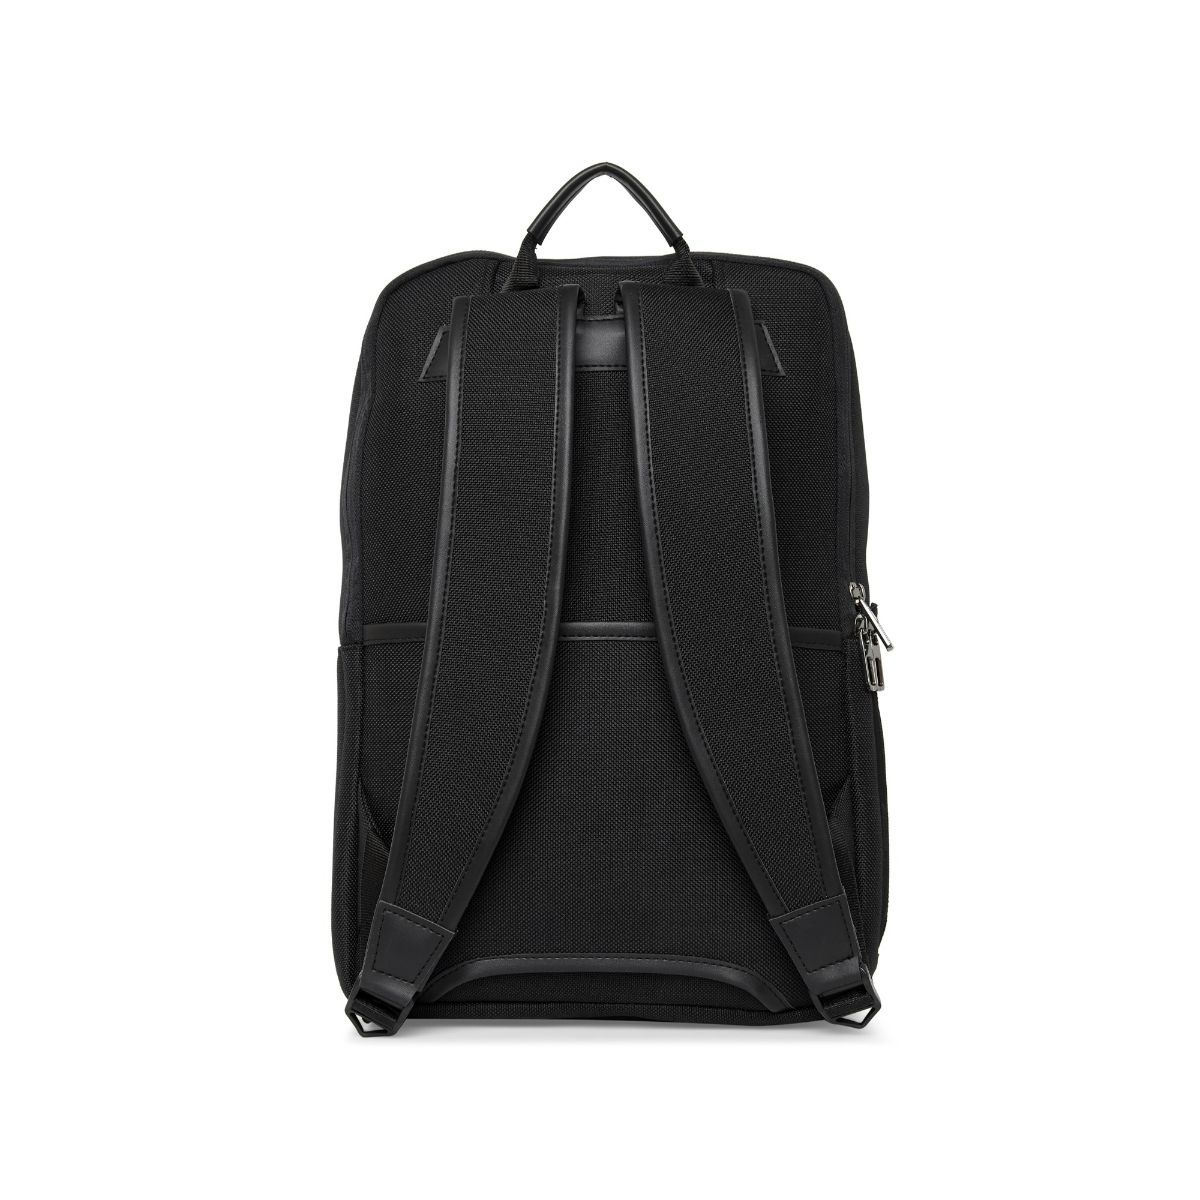 MBOSS Faux Leather Laptop Backpack: Buy MBOSS Faux Leather Laptop ...